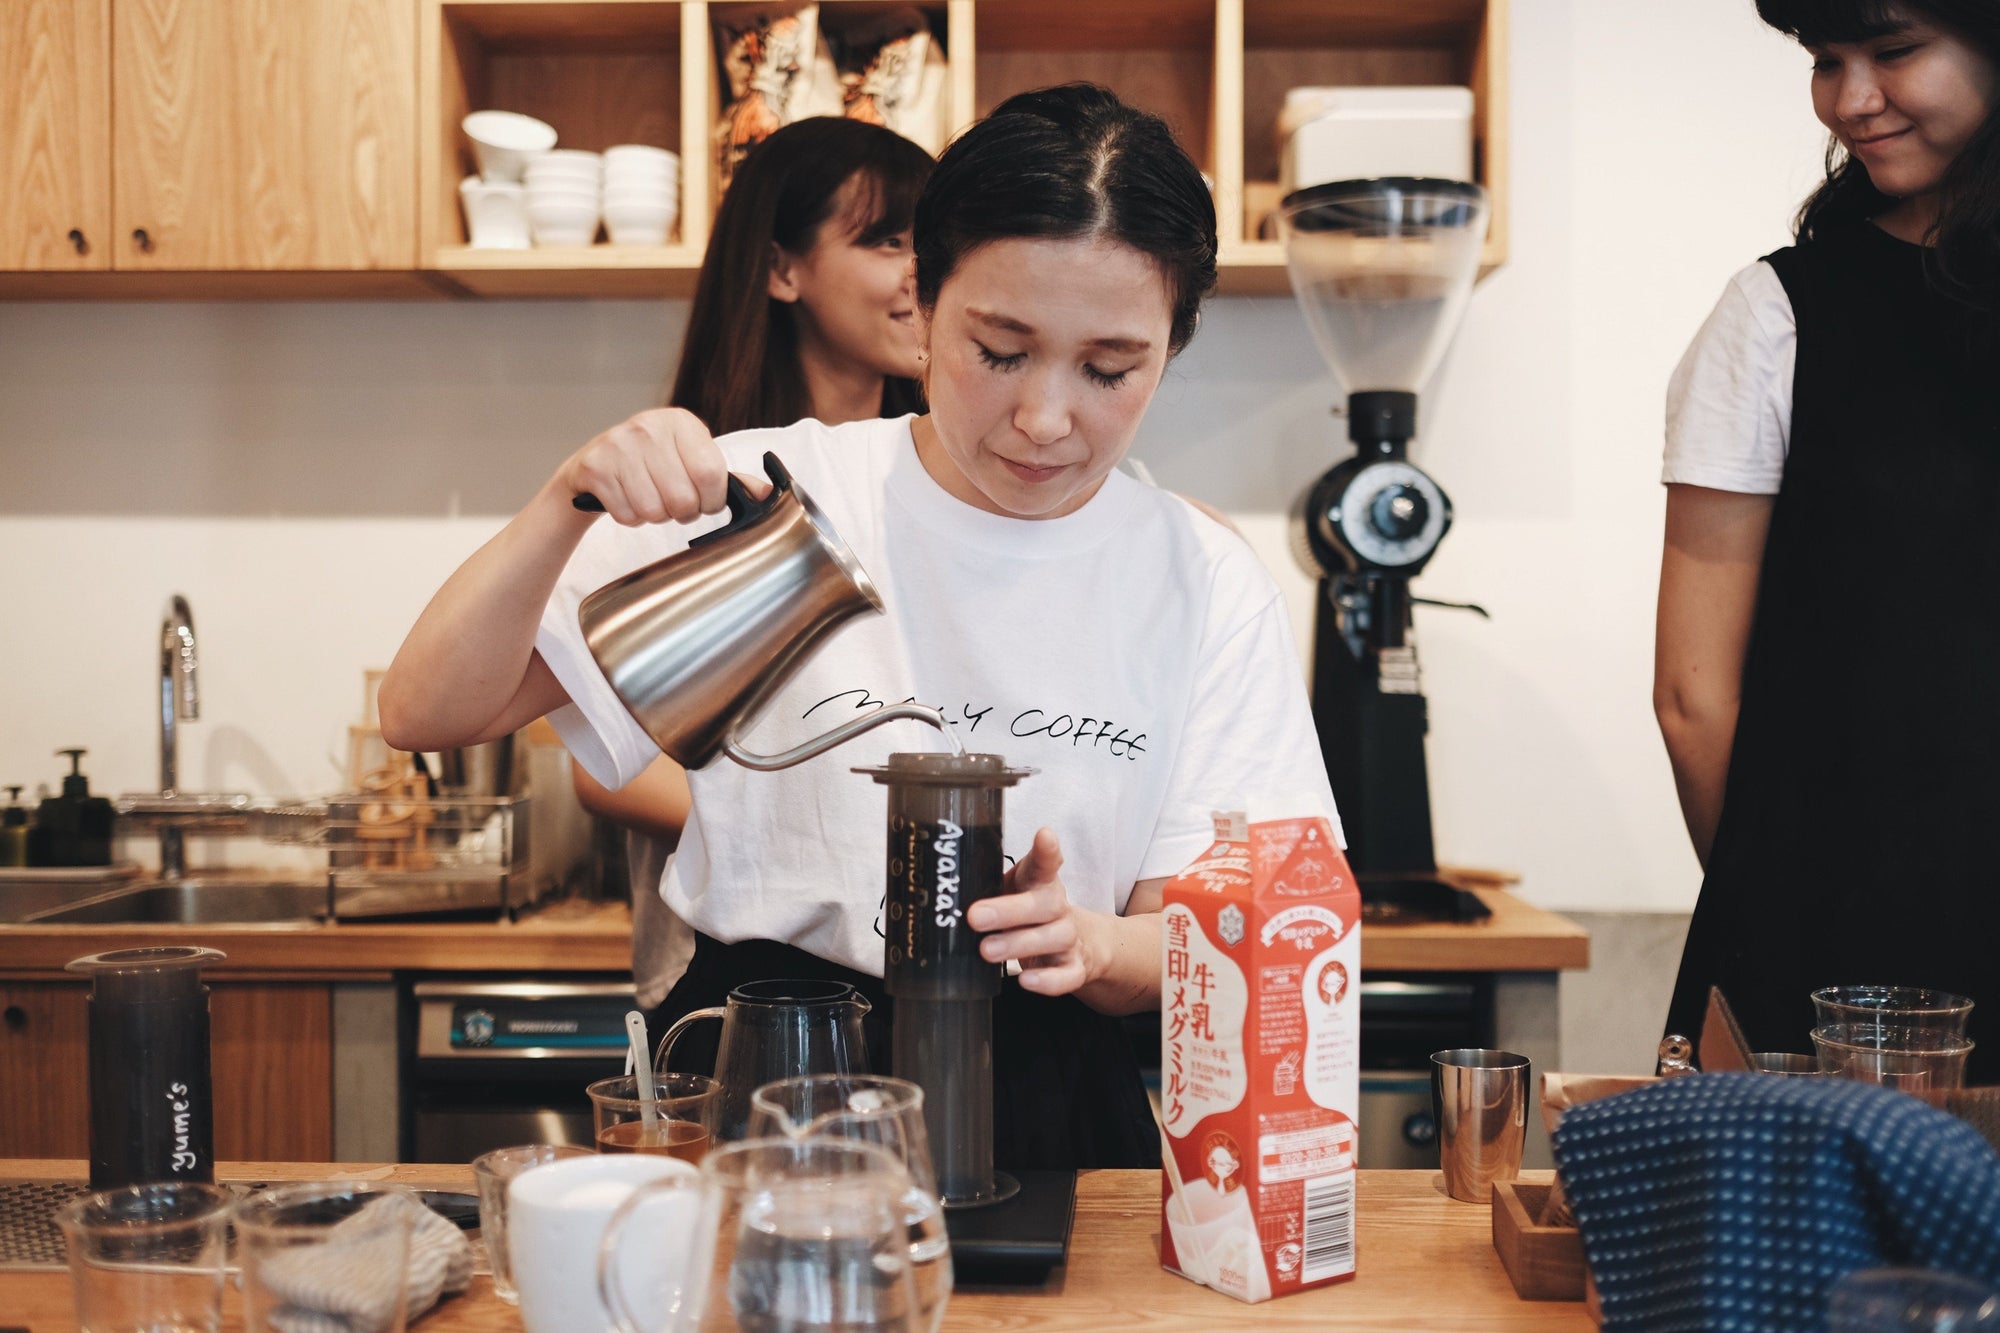 Guest Barista/ Aeropress Seminar with MANLY COFFEE Event Photo Report